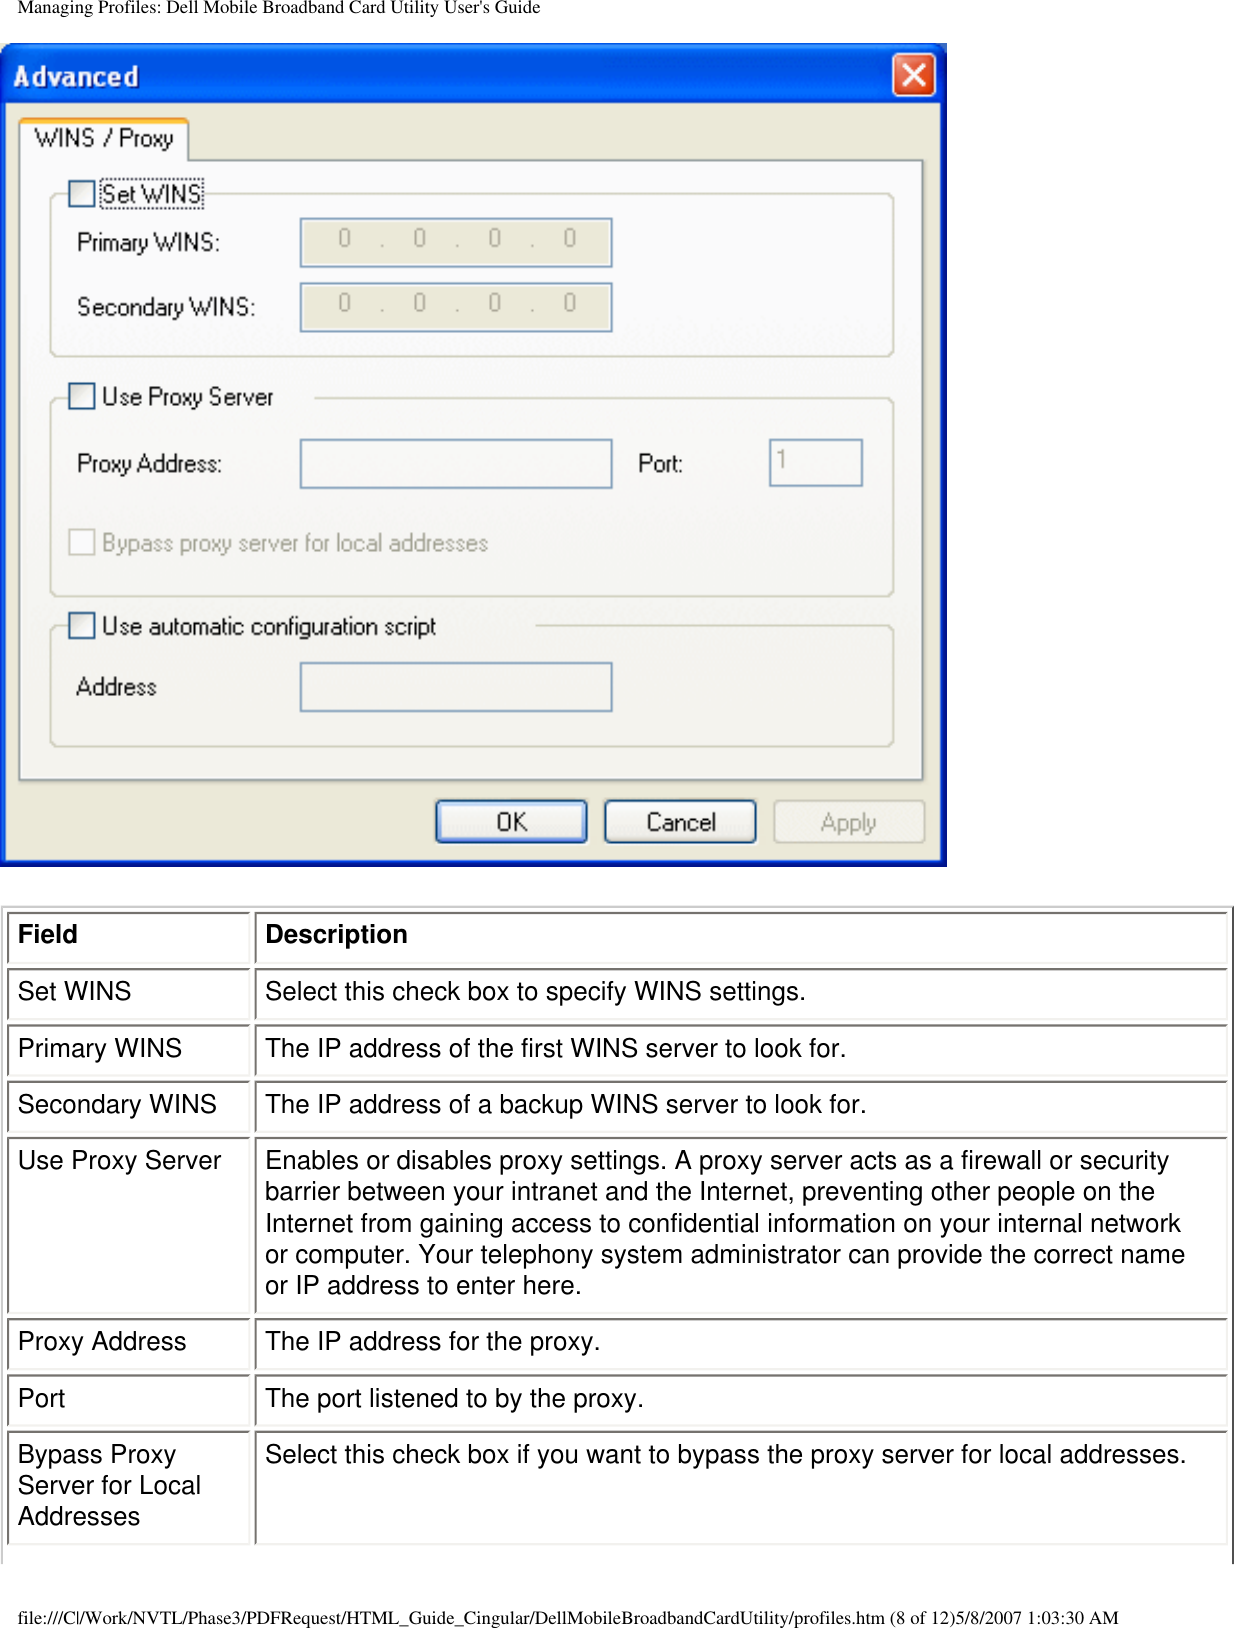 Managing Profiles: Dell Mobile Broadband Card Utility User&apos;s GuideField DescriptionSet WINS Select this check box to specify WINS settings.Primary WINS The IP address of the first WINS server to look for.Secondary WINS The IP address of a backup WINS server to look for.Use Proxy Server Enables or disables proxy settings. A proxy server acts as a firewall or security barrier between your intranet and the Internet, preventing other people on the Internet from gaining access to confidential information on your internal network or computer. Your telephony system administrator can provide the correct name or IP address to enter here.Proxy Address The IP address for the proxy.Port The port listened to by the proxy.Bypass Proxy Server for Local AddressesSelect this check box if you want to bypass the proxy server for local addresses.file:///C|/Work/NVTL/Phase3/PDFRequest/HTML_Guide_Cingular/DellMobileBroadbandCardUtility/profiles.htm (8 of 12)5/8/2007 1:03:30 AM